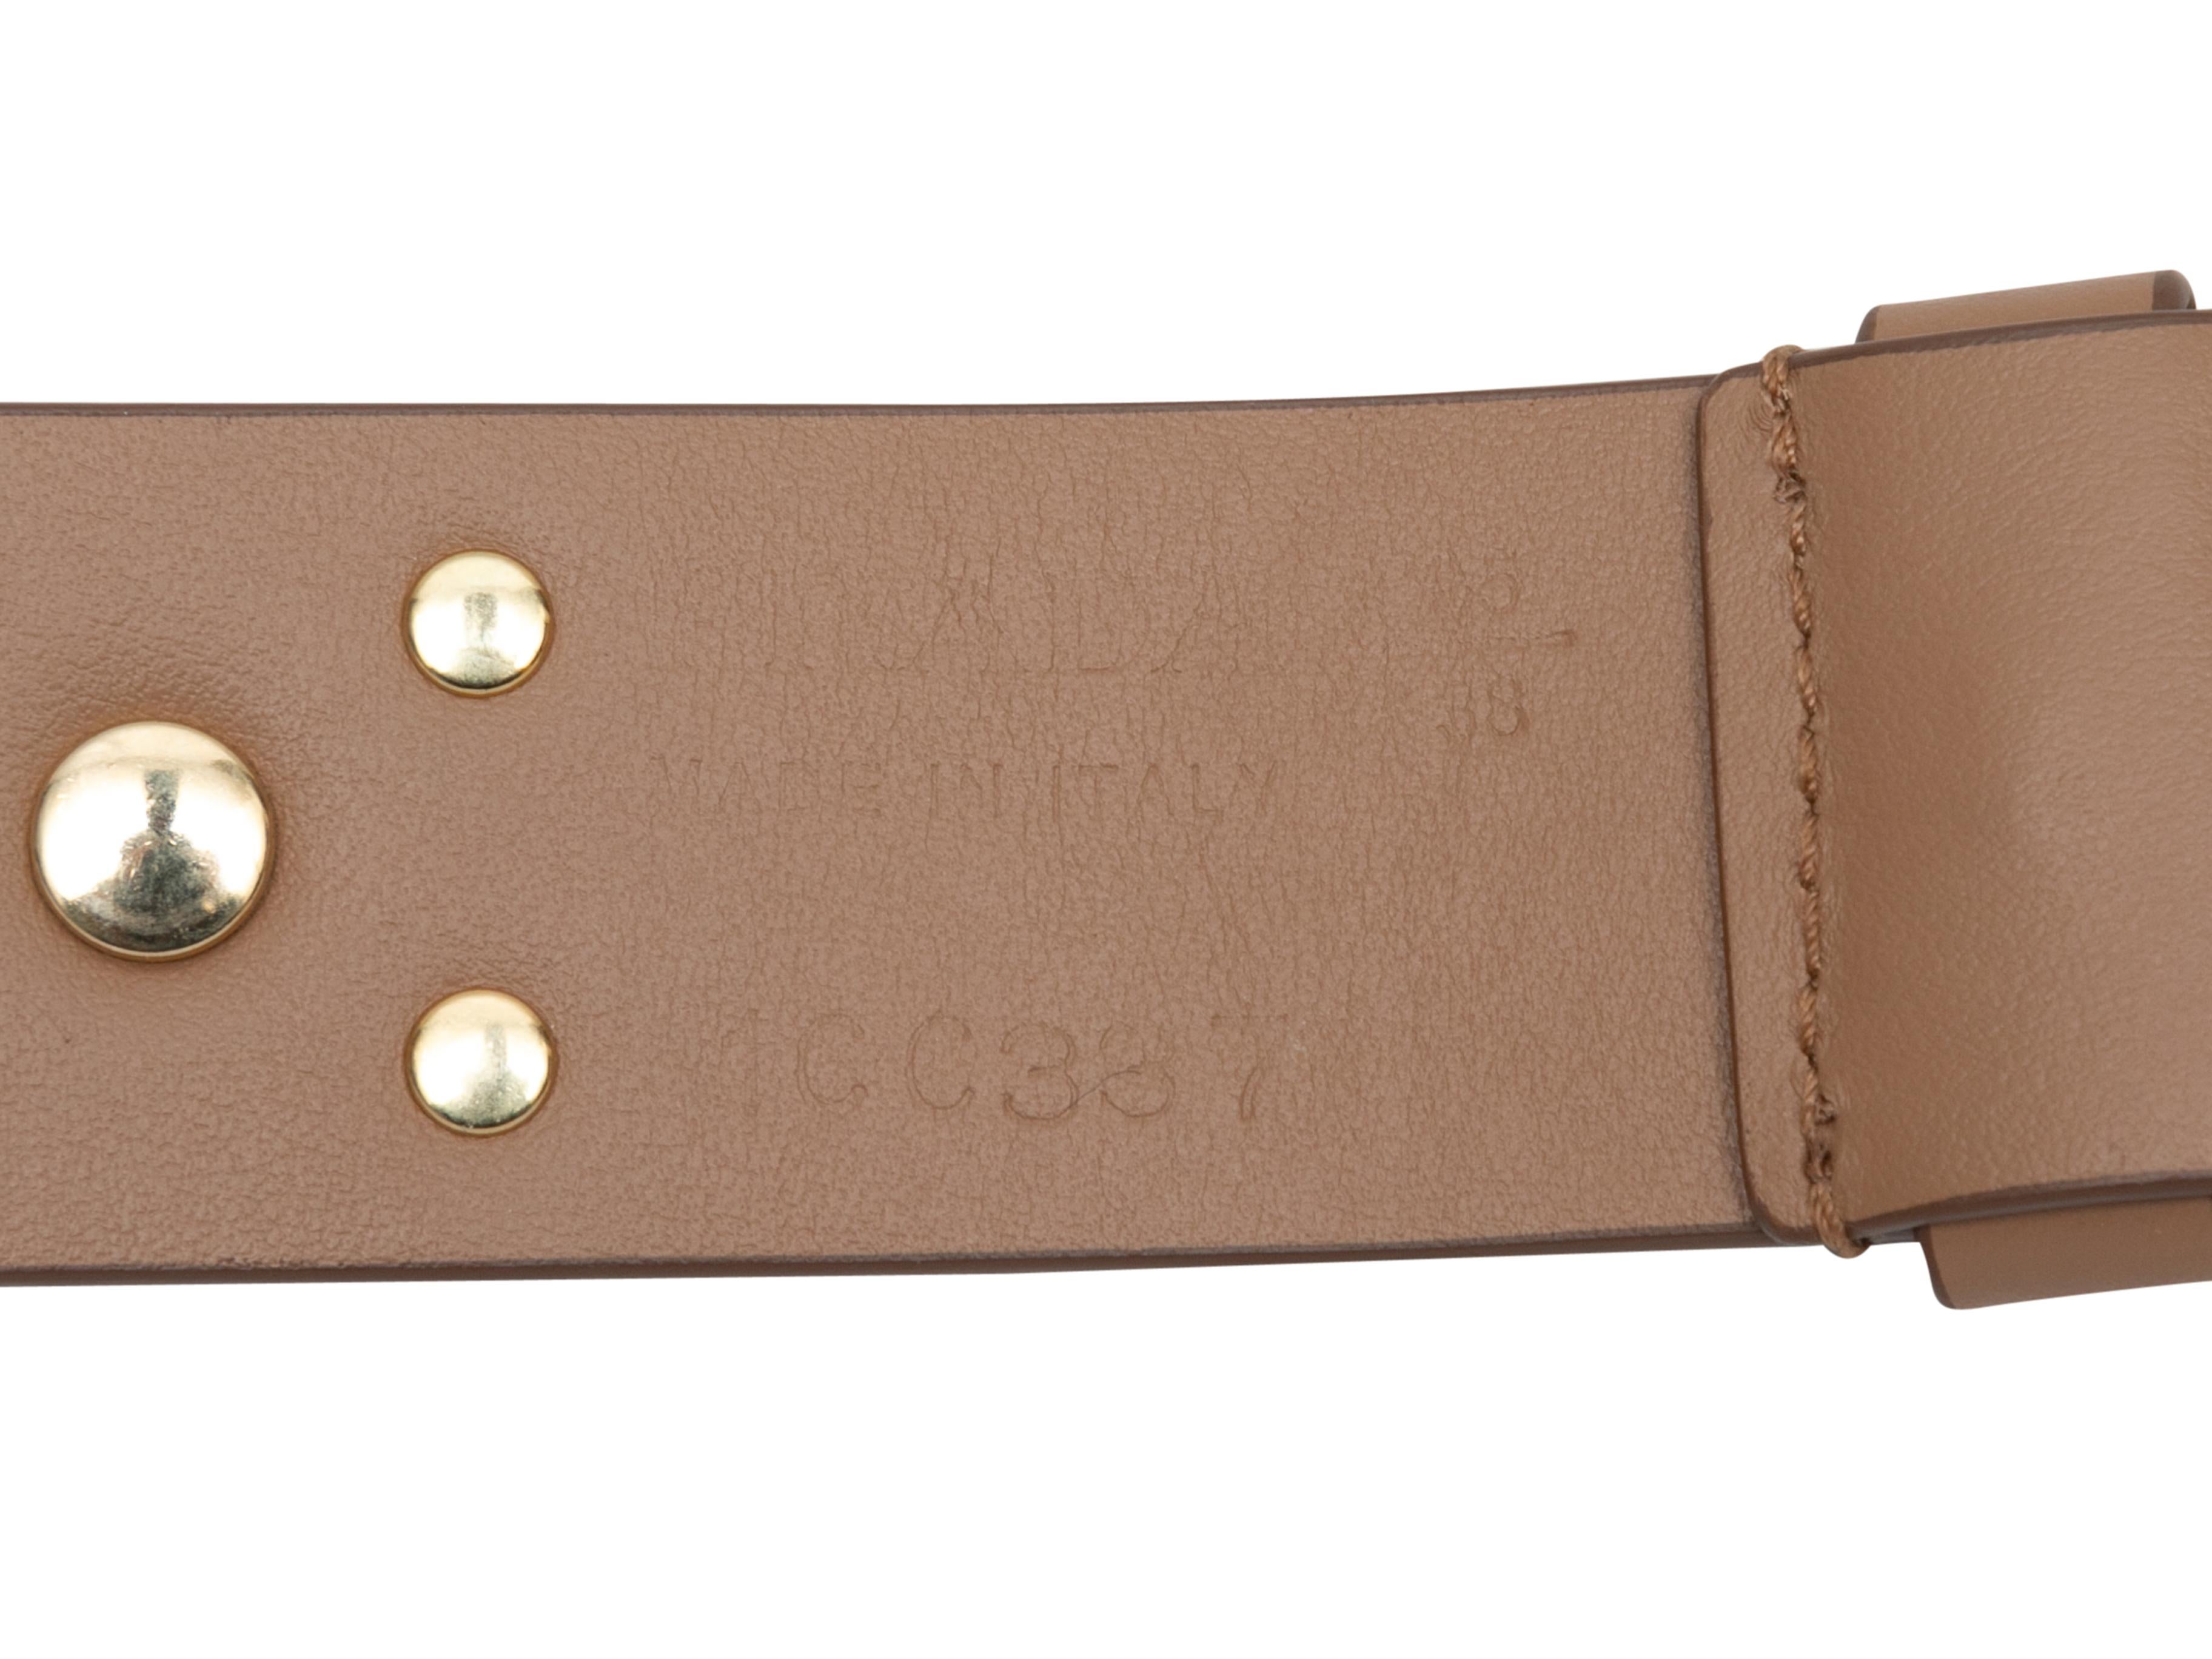 Brown leather studded belt by Prada. Gold-tone hardware. Buckle closure. 1.75